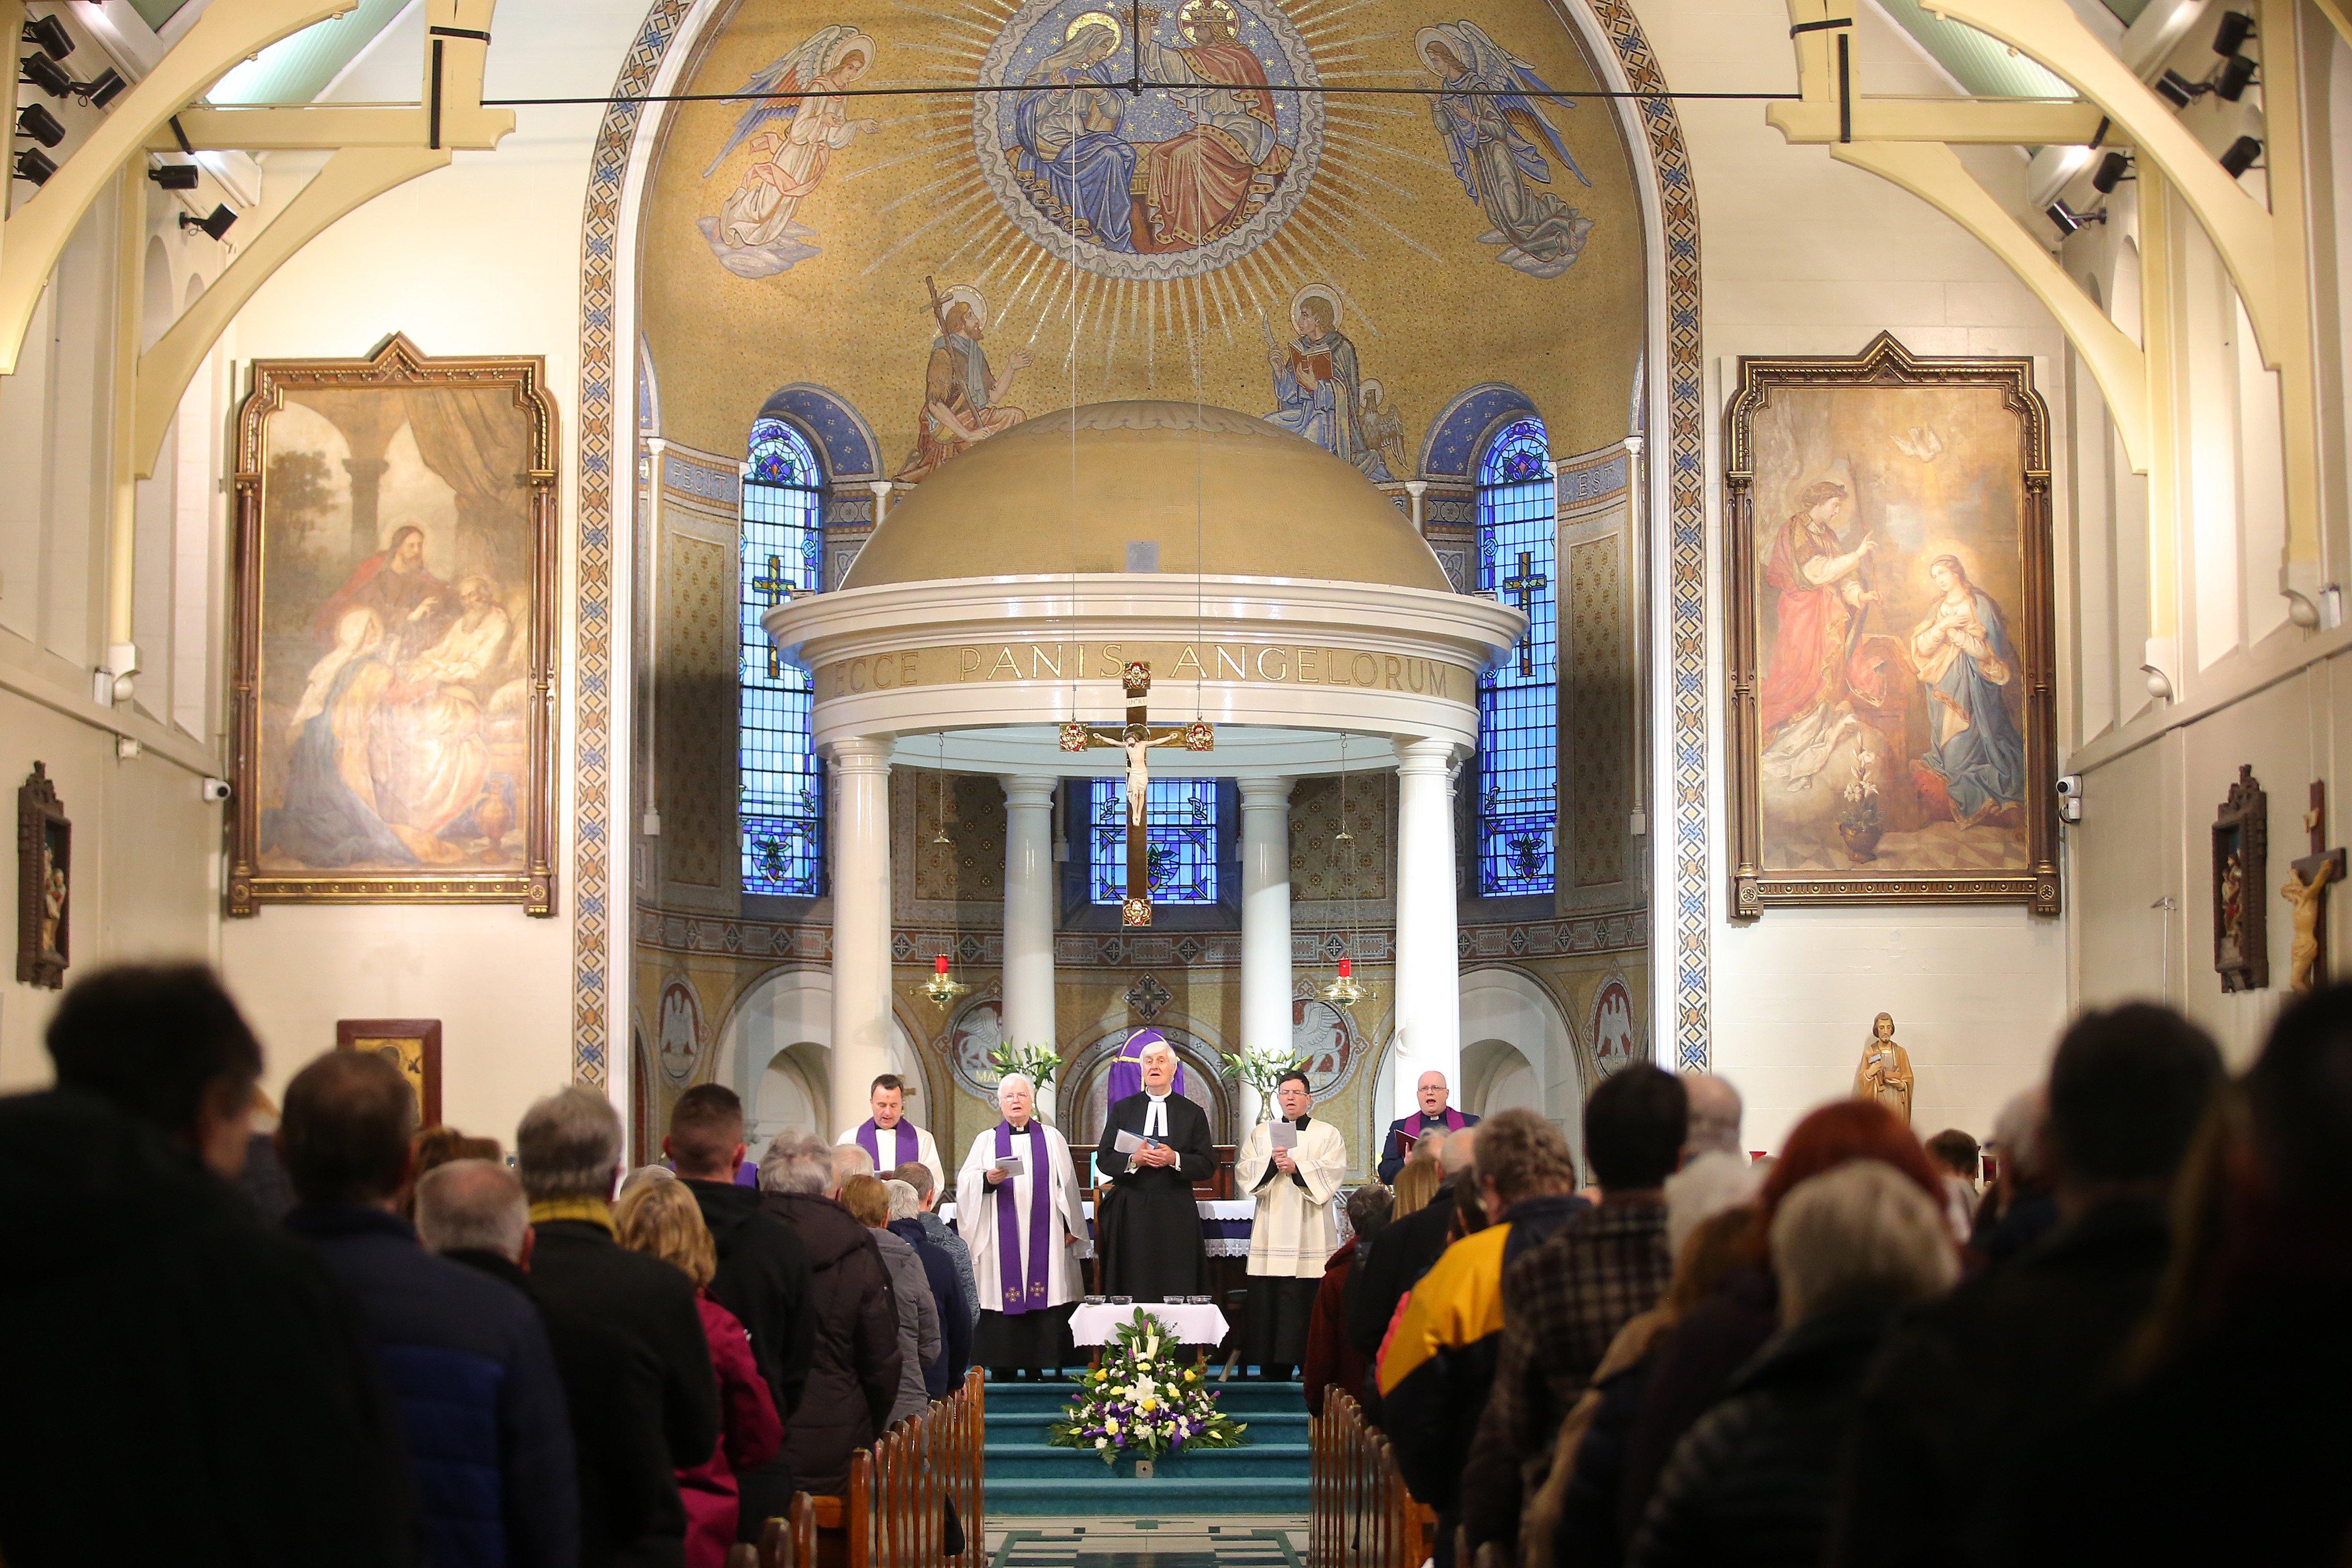 The service at St Mary's Catholic Church on Chapel Lane in Belfast City Centre